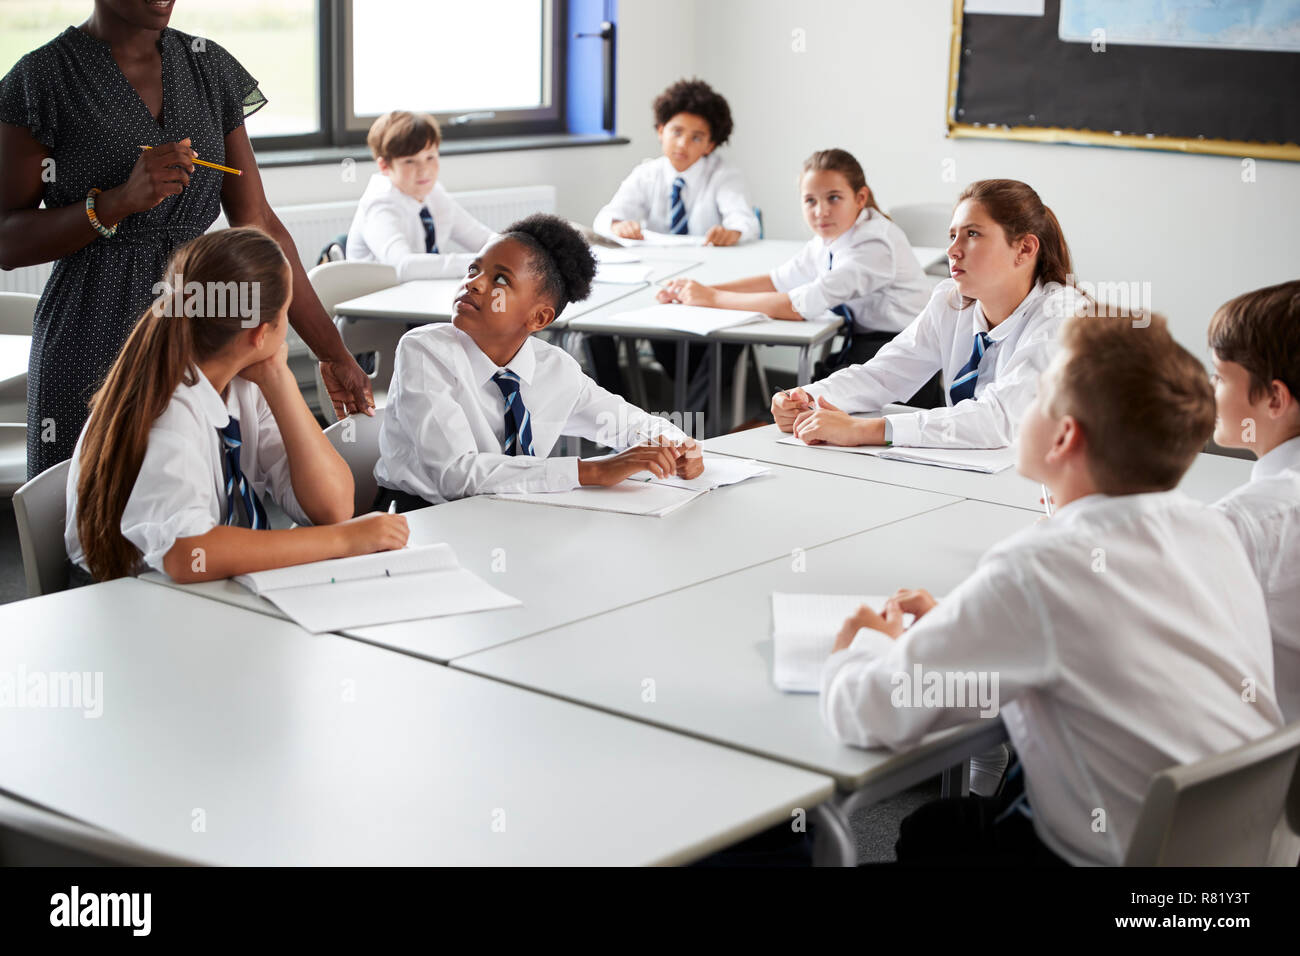 Detail Of Female High School Tutor Helping Students Wearing Uniform Seated Around Tables In Lesson Stock Photo